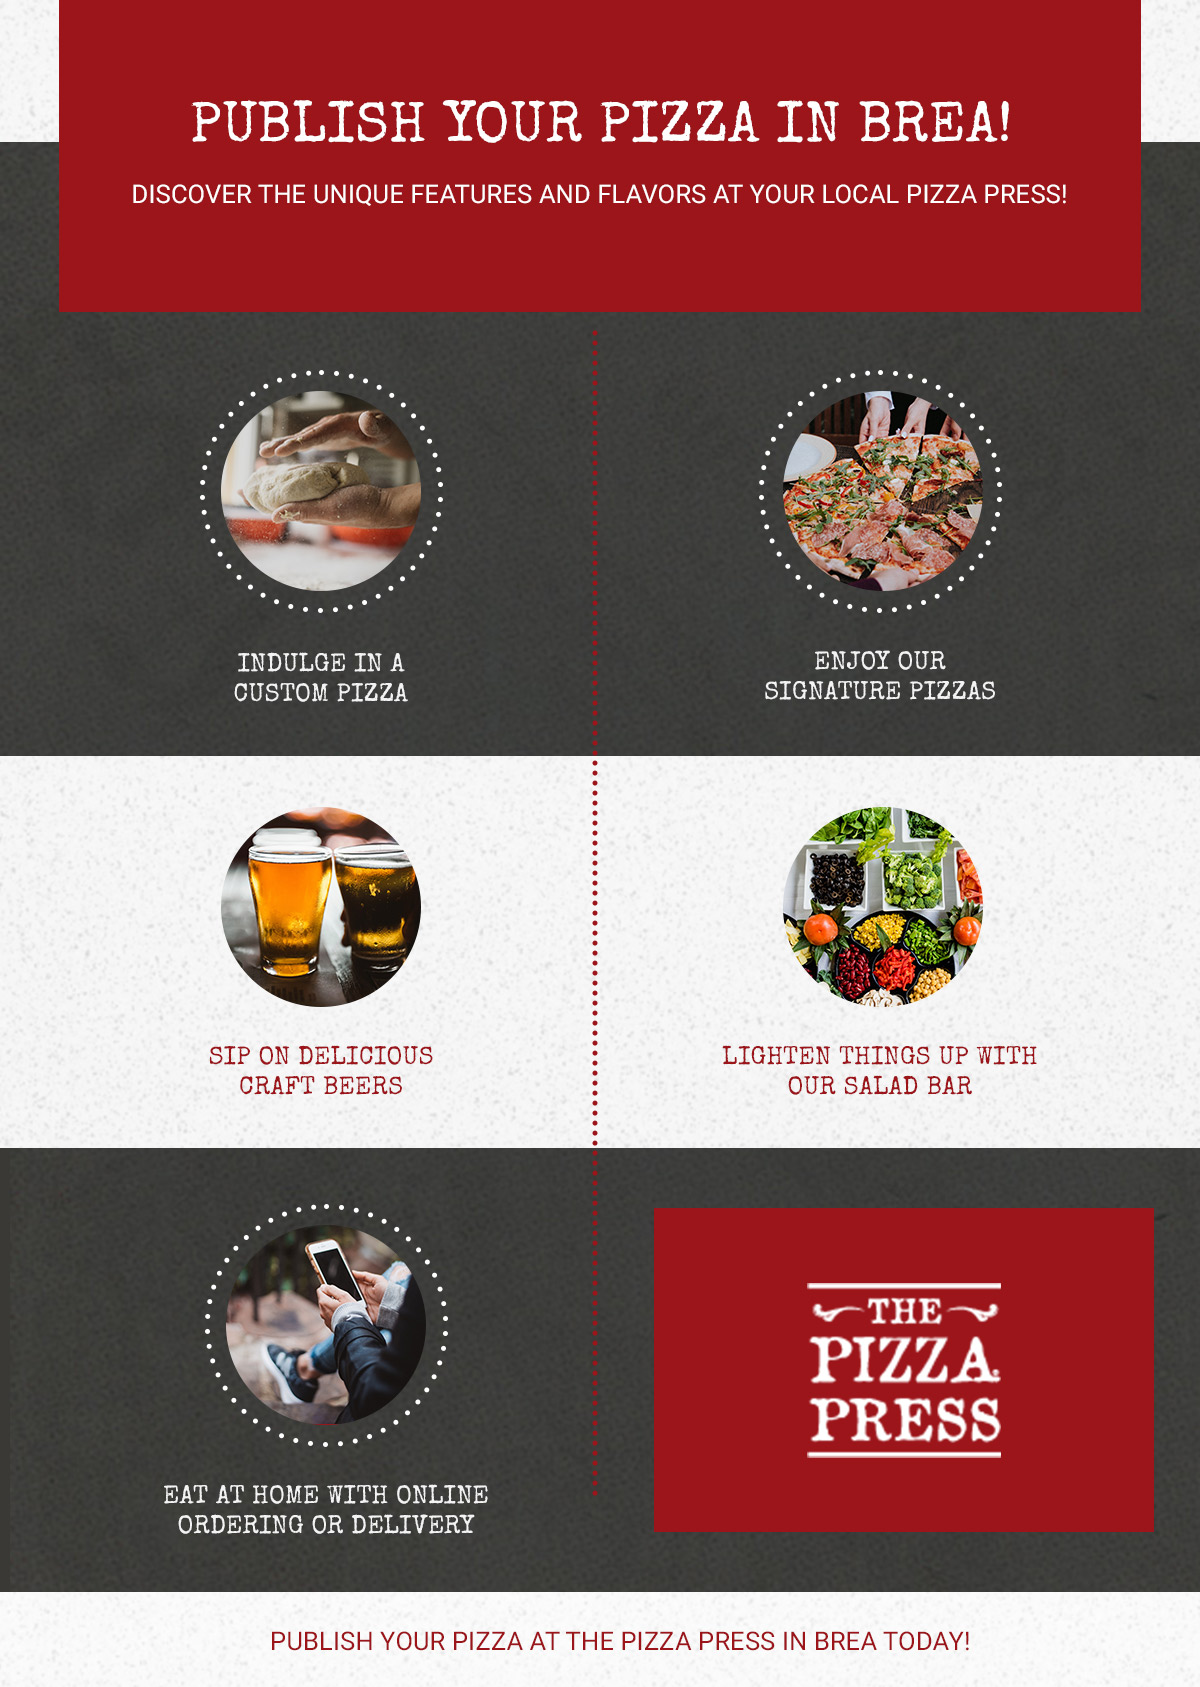 Publish-Your-Pizza-in-Brea-60994be071646